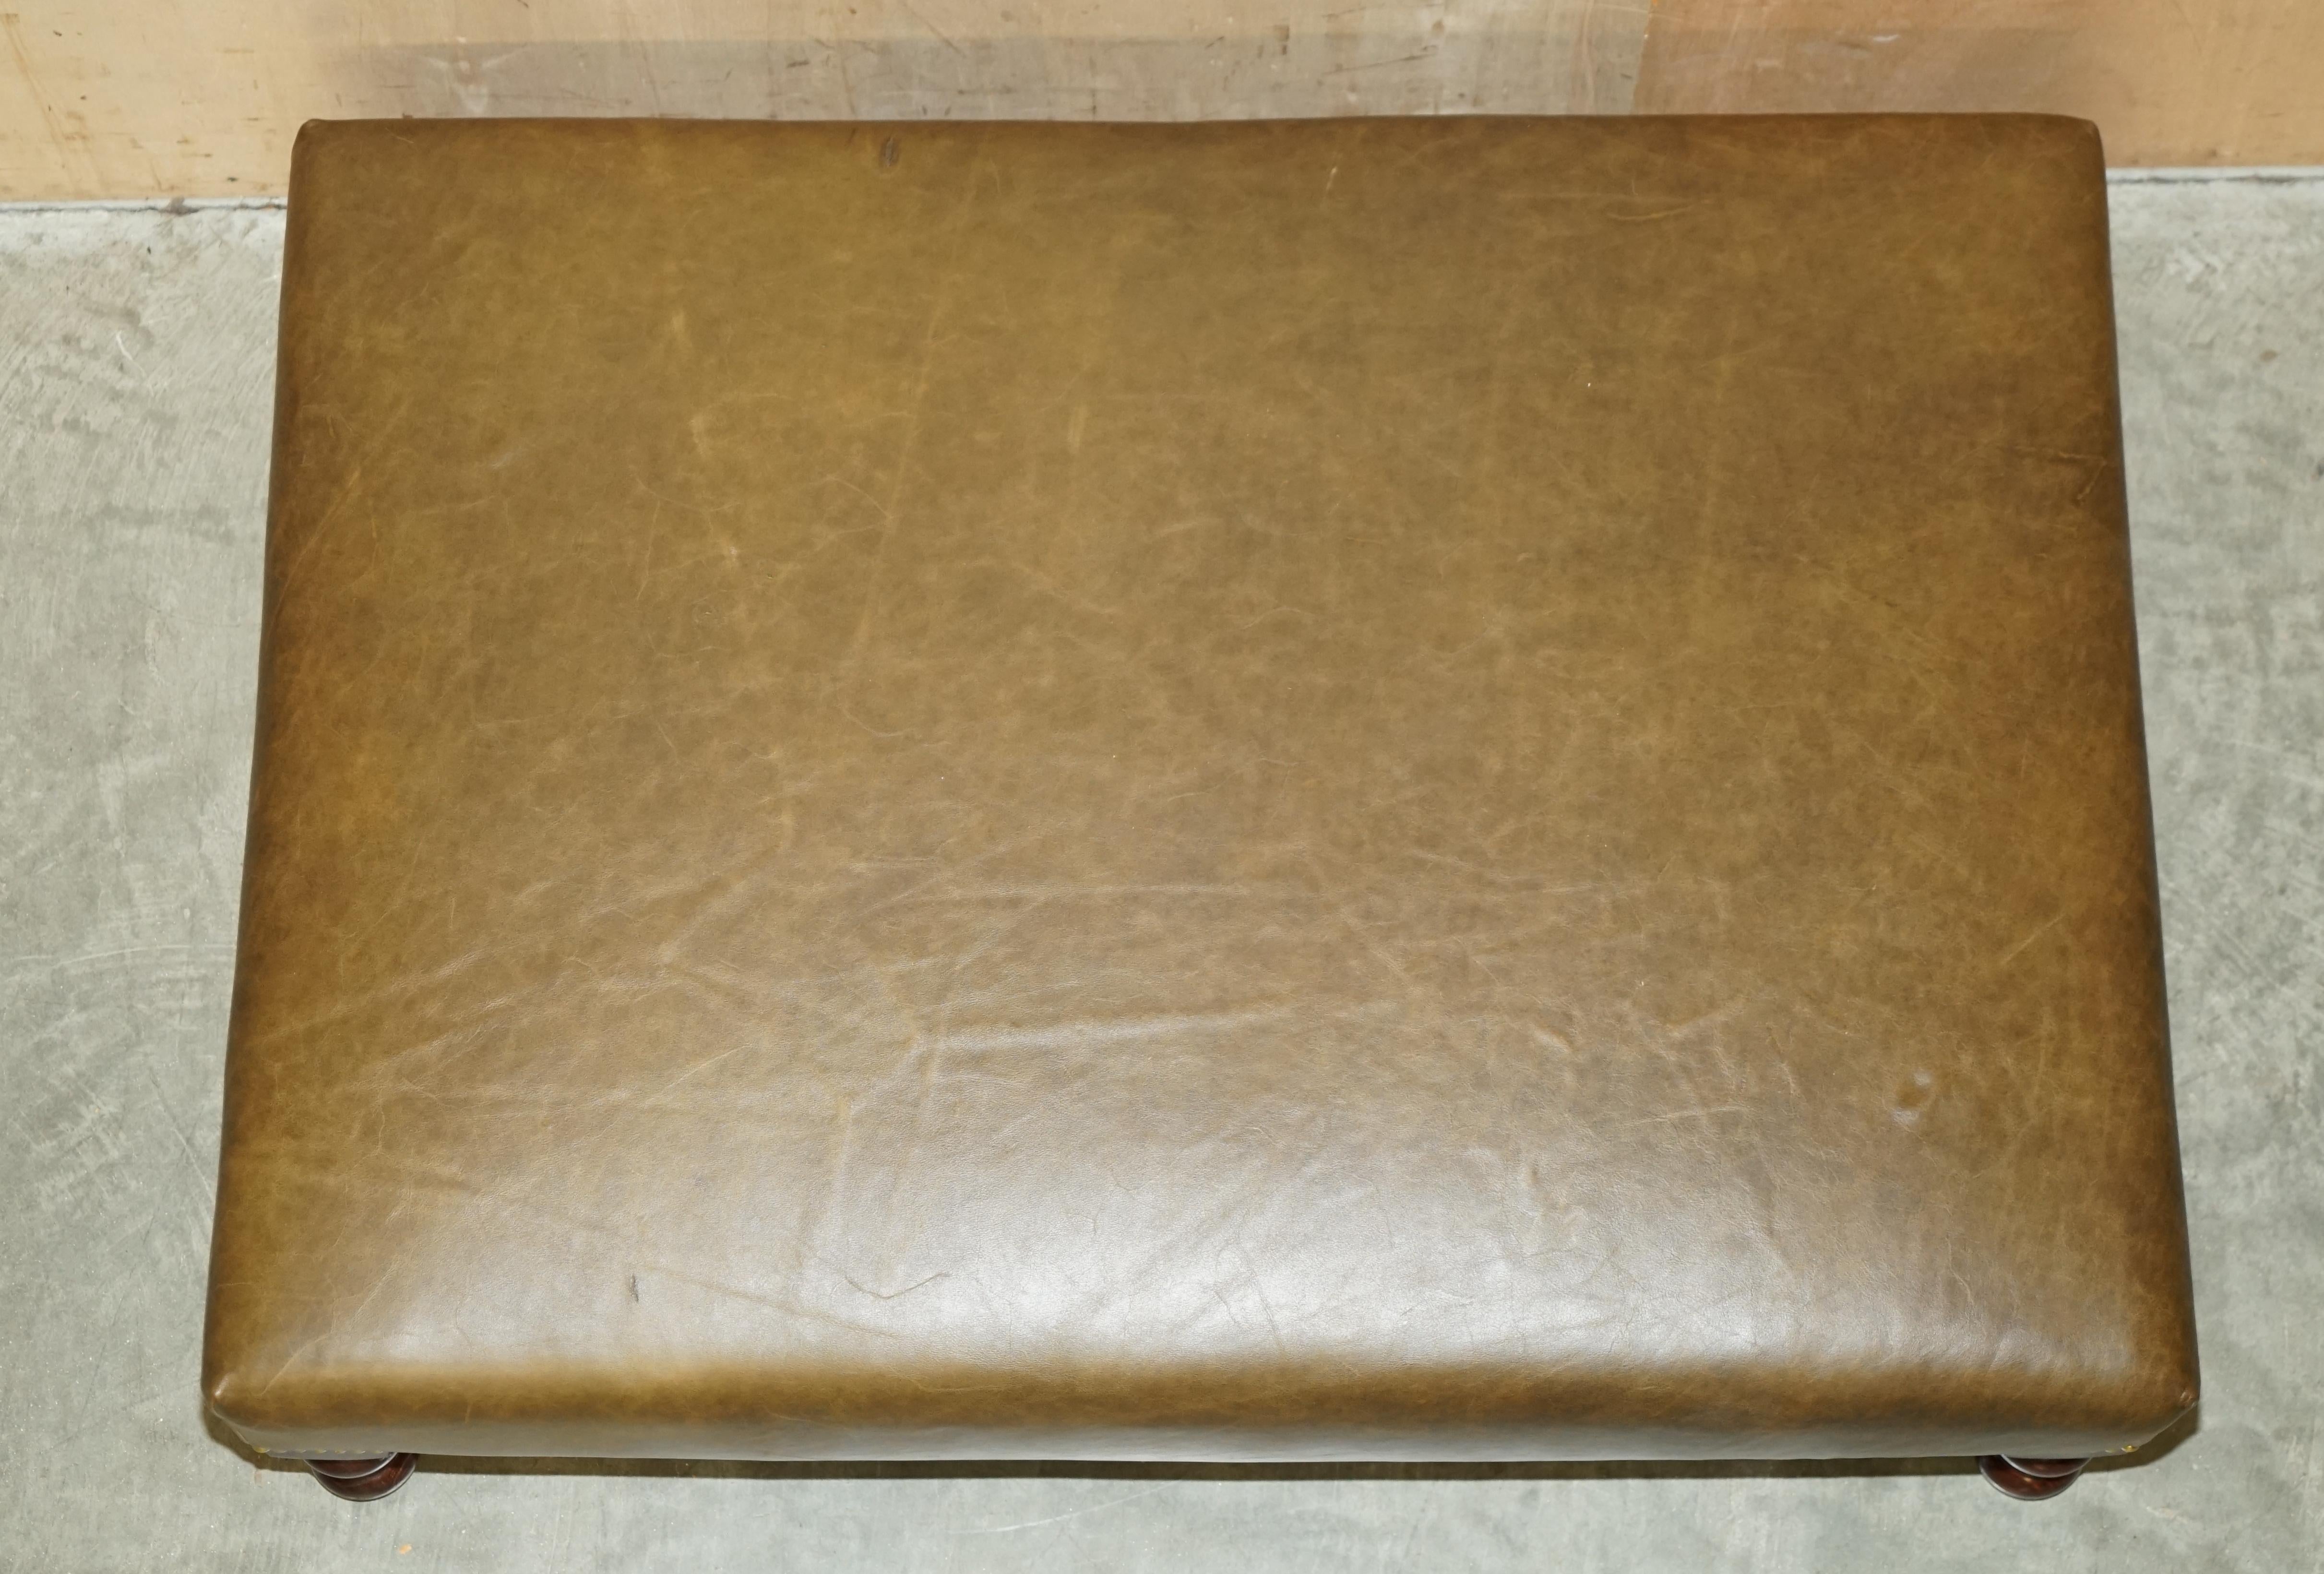 EX DISPLAY GEORGE SMiTH HERITAGE BROWN LEATHER OTTOMAN FOOTSTOOL 1